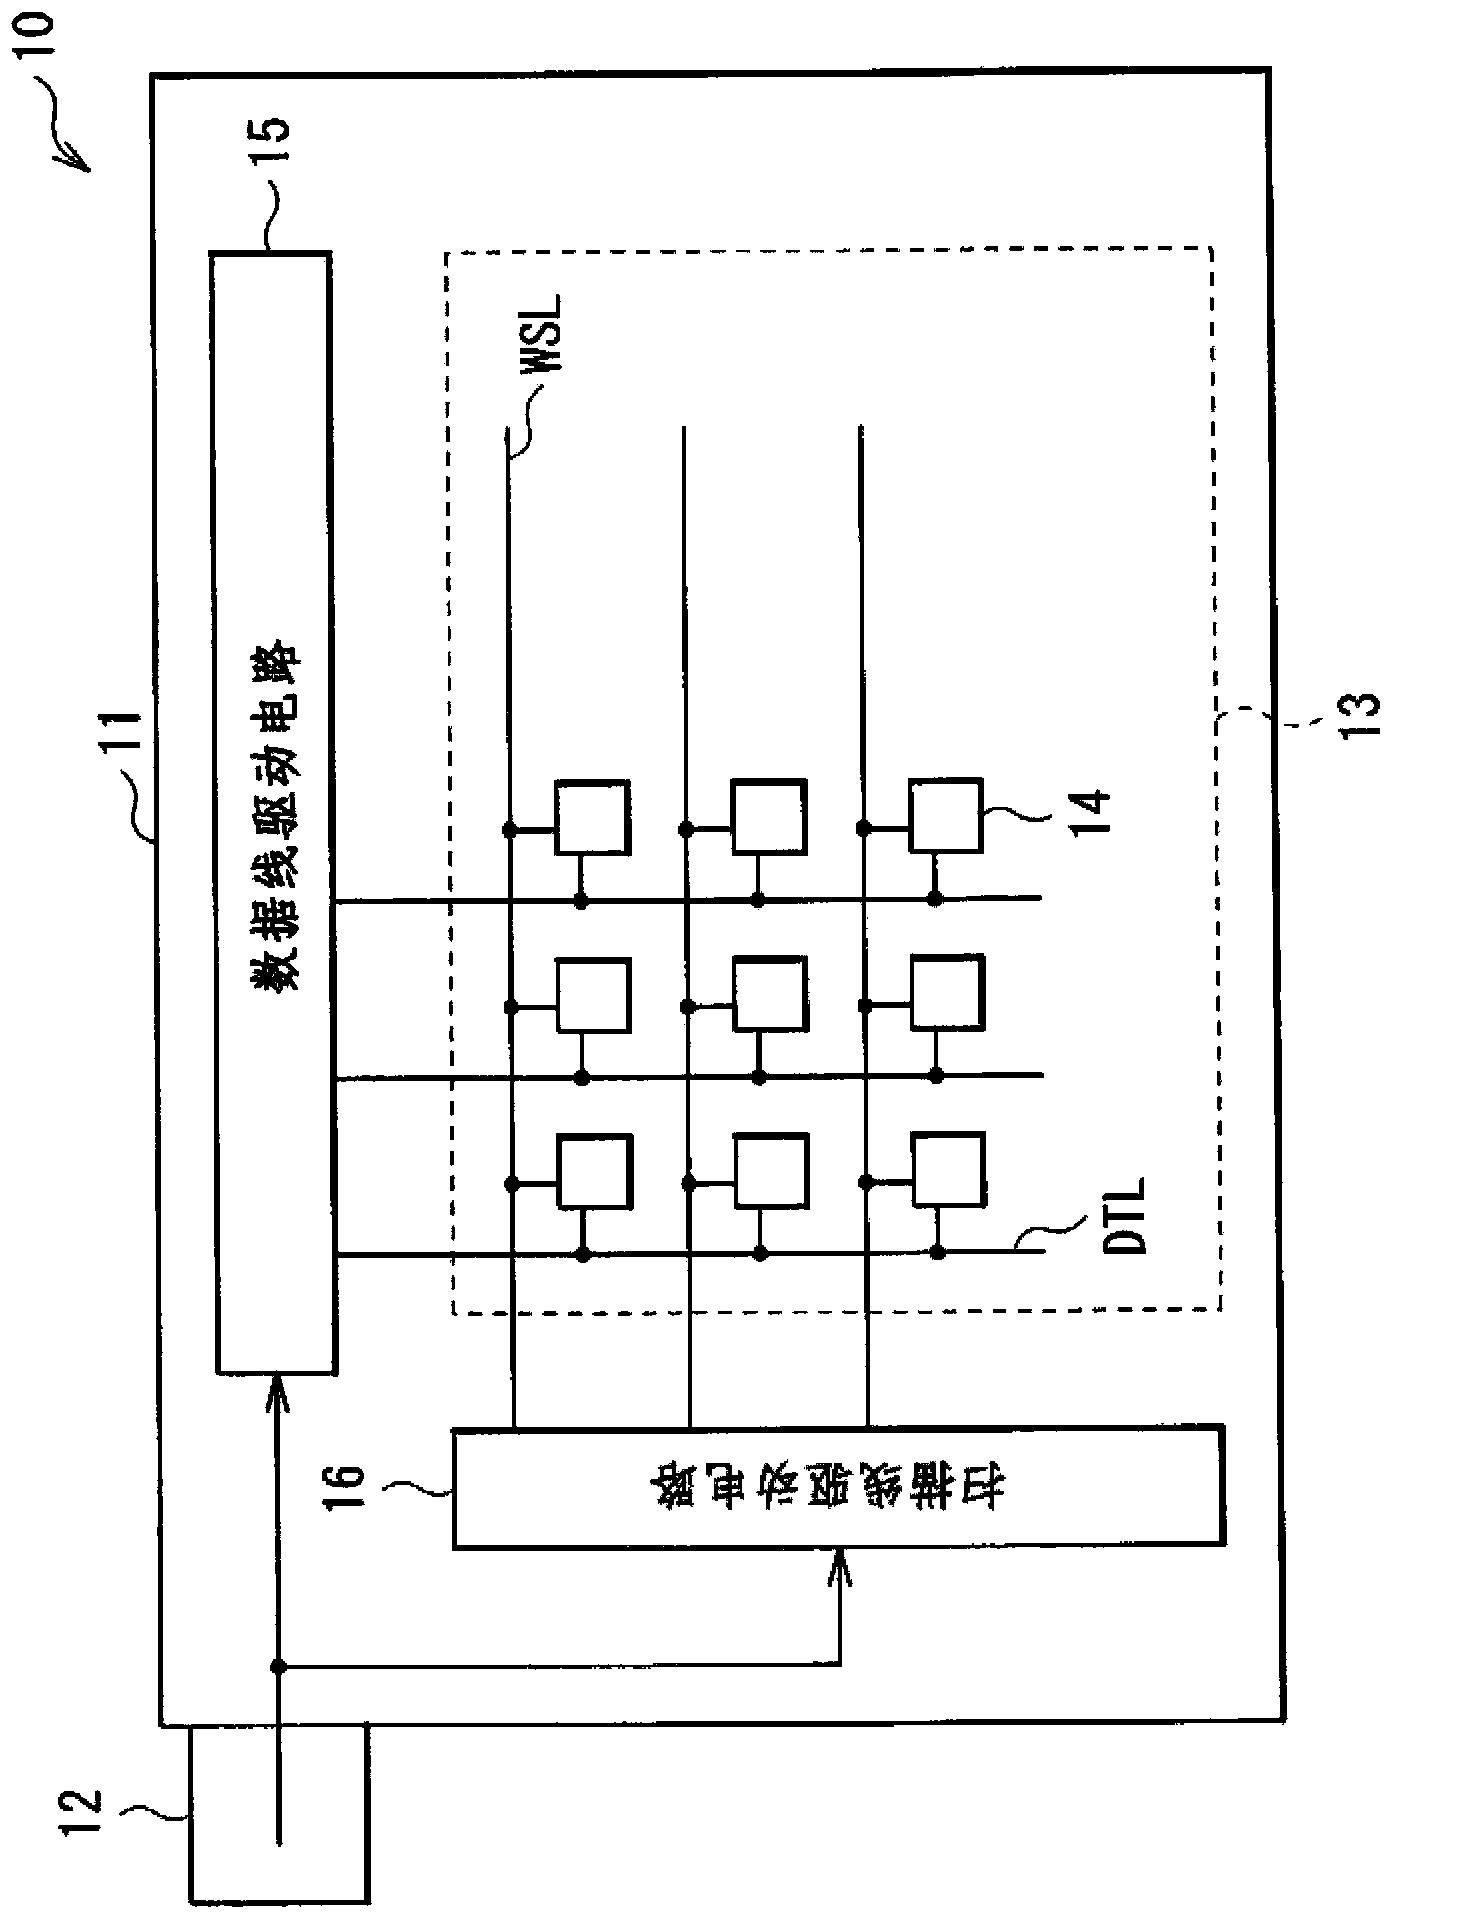 Driver IC, mounting board, display unit, and projection display unit